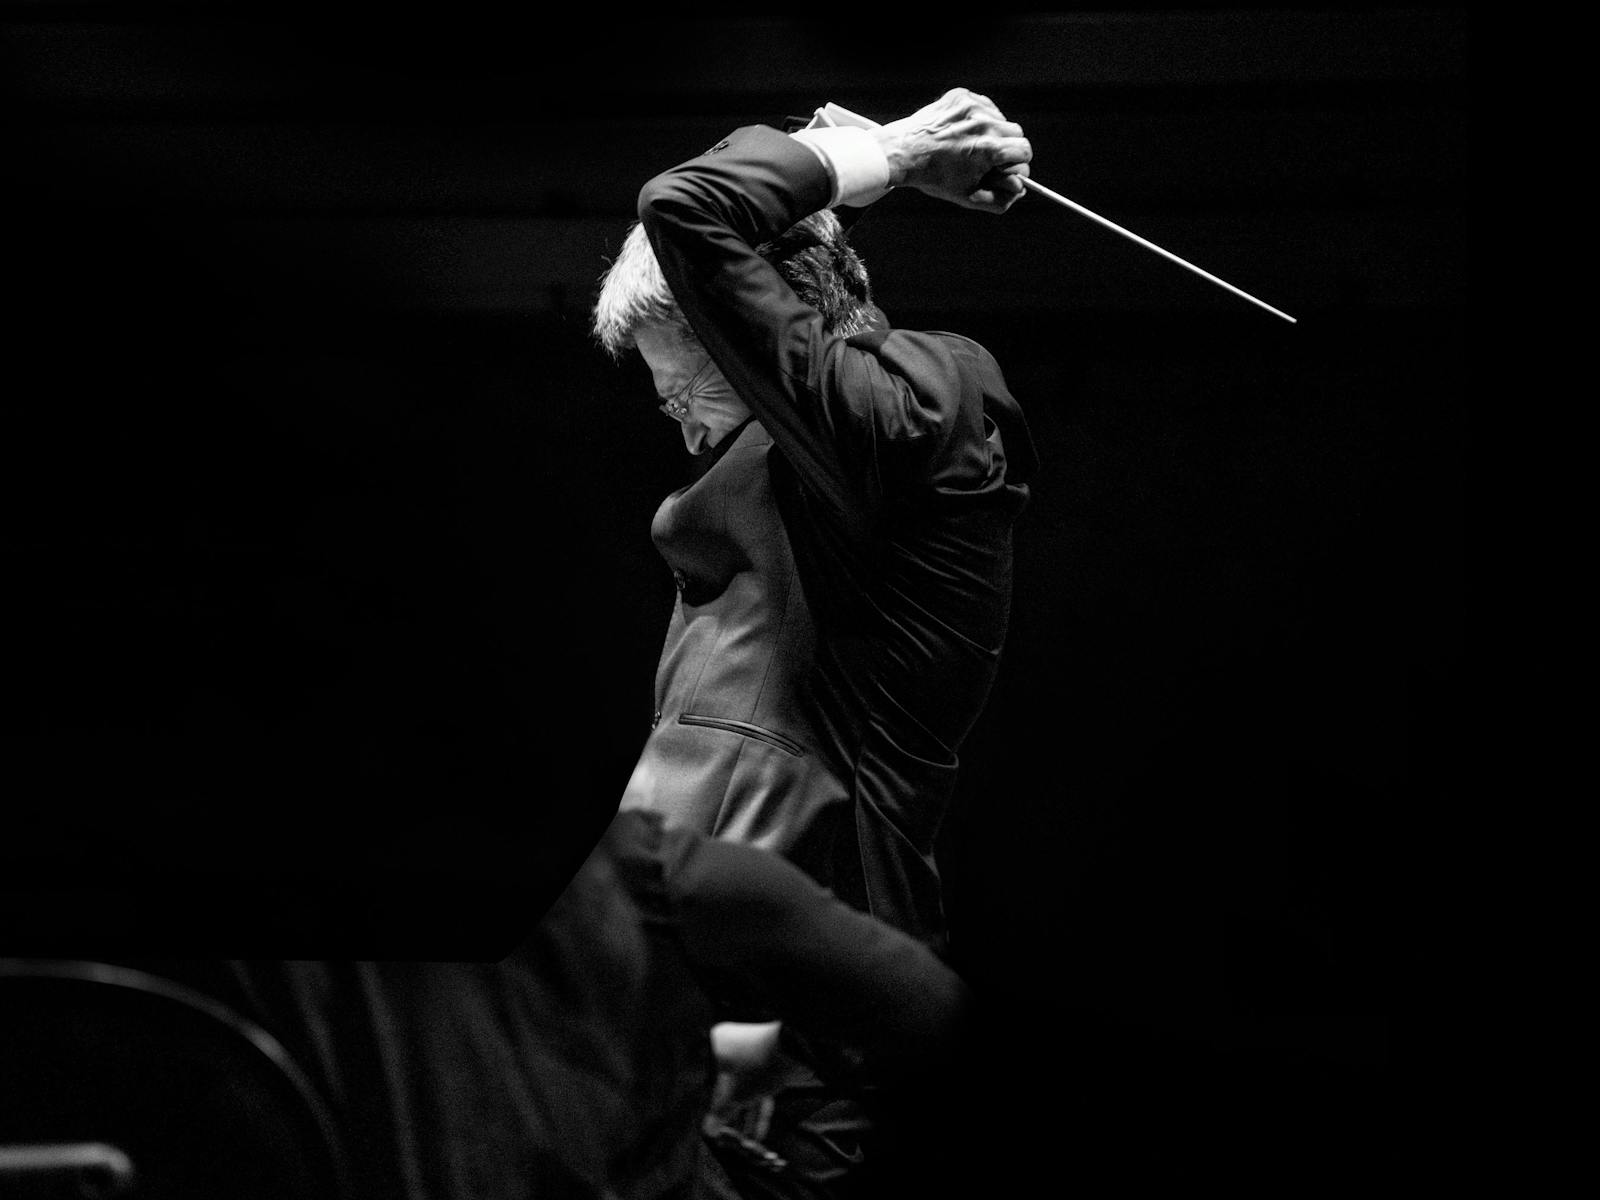 Monochrome photo of a conductor against a black backdrop. His baton is lifted behind his head.